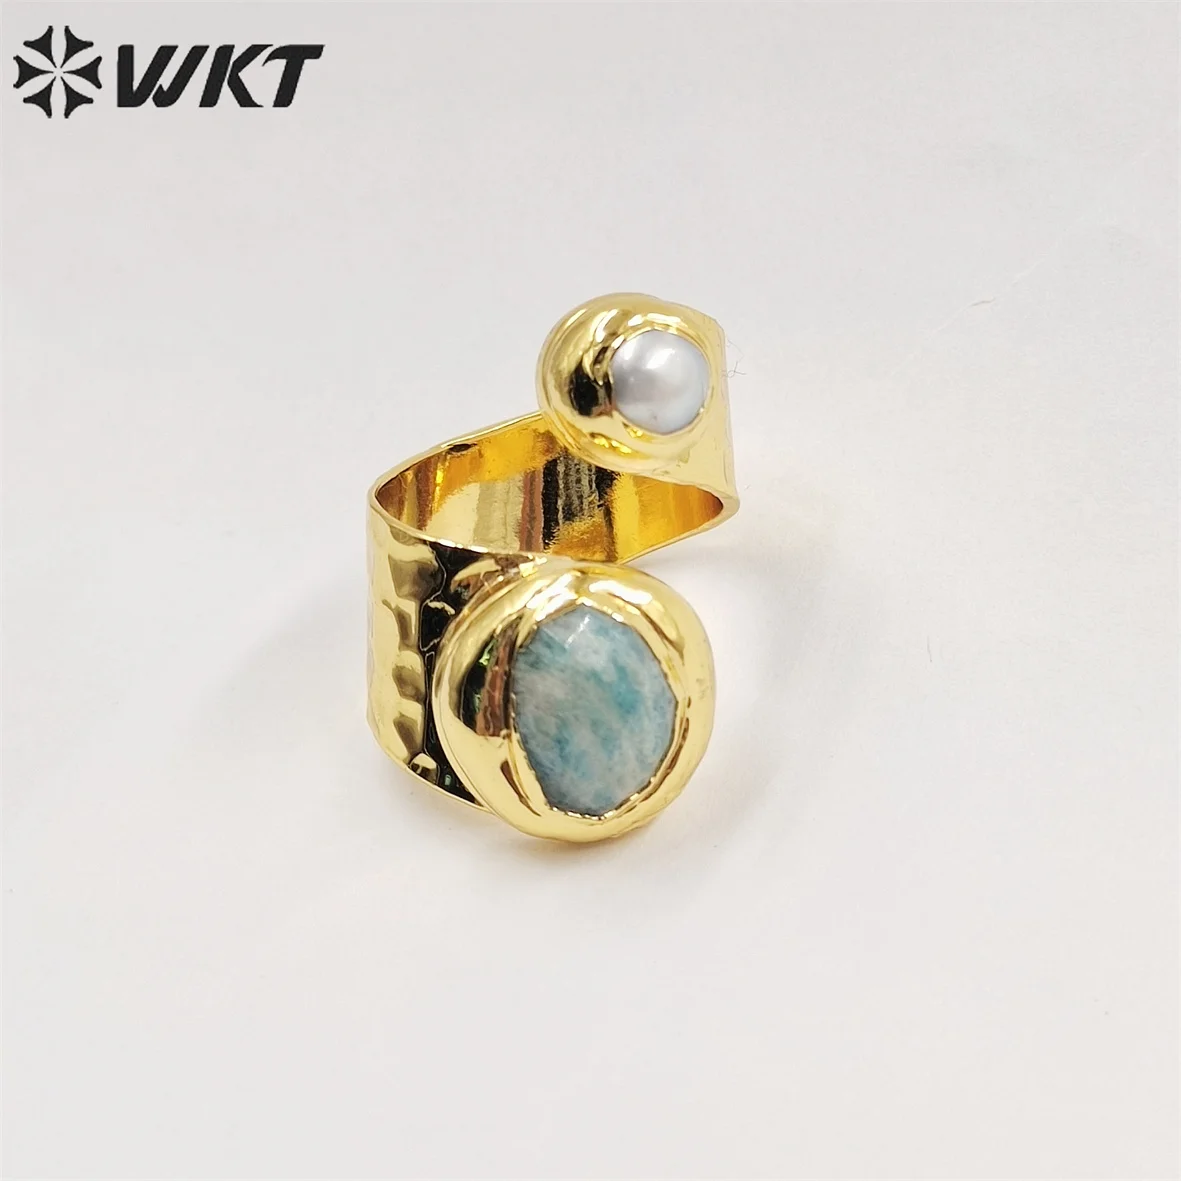 

WT-R438 Amazing Hot Double Stone Ring For Women 18k Real Gold Plated Resist Tarnishable Amazonist Pearl Birthday Gift